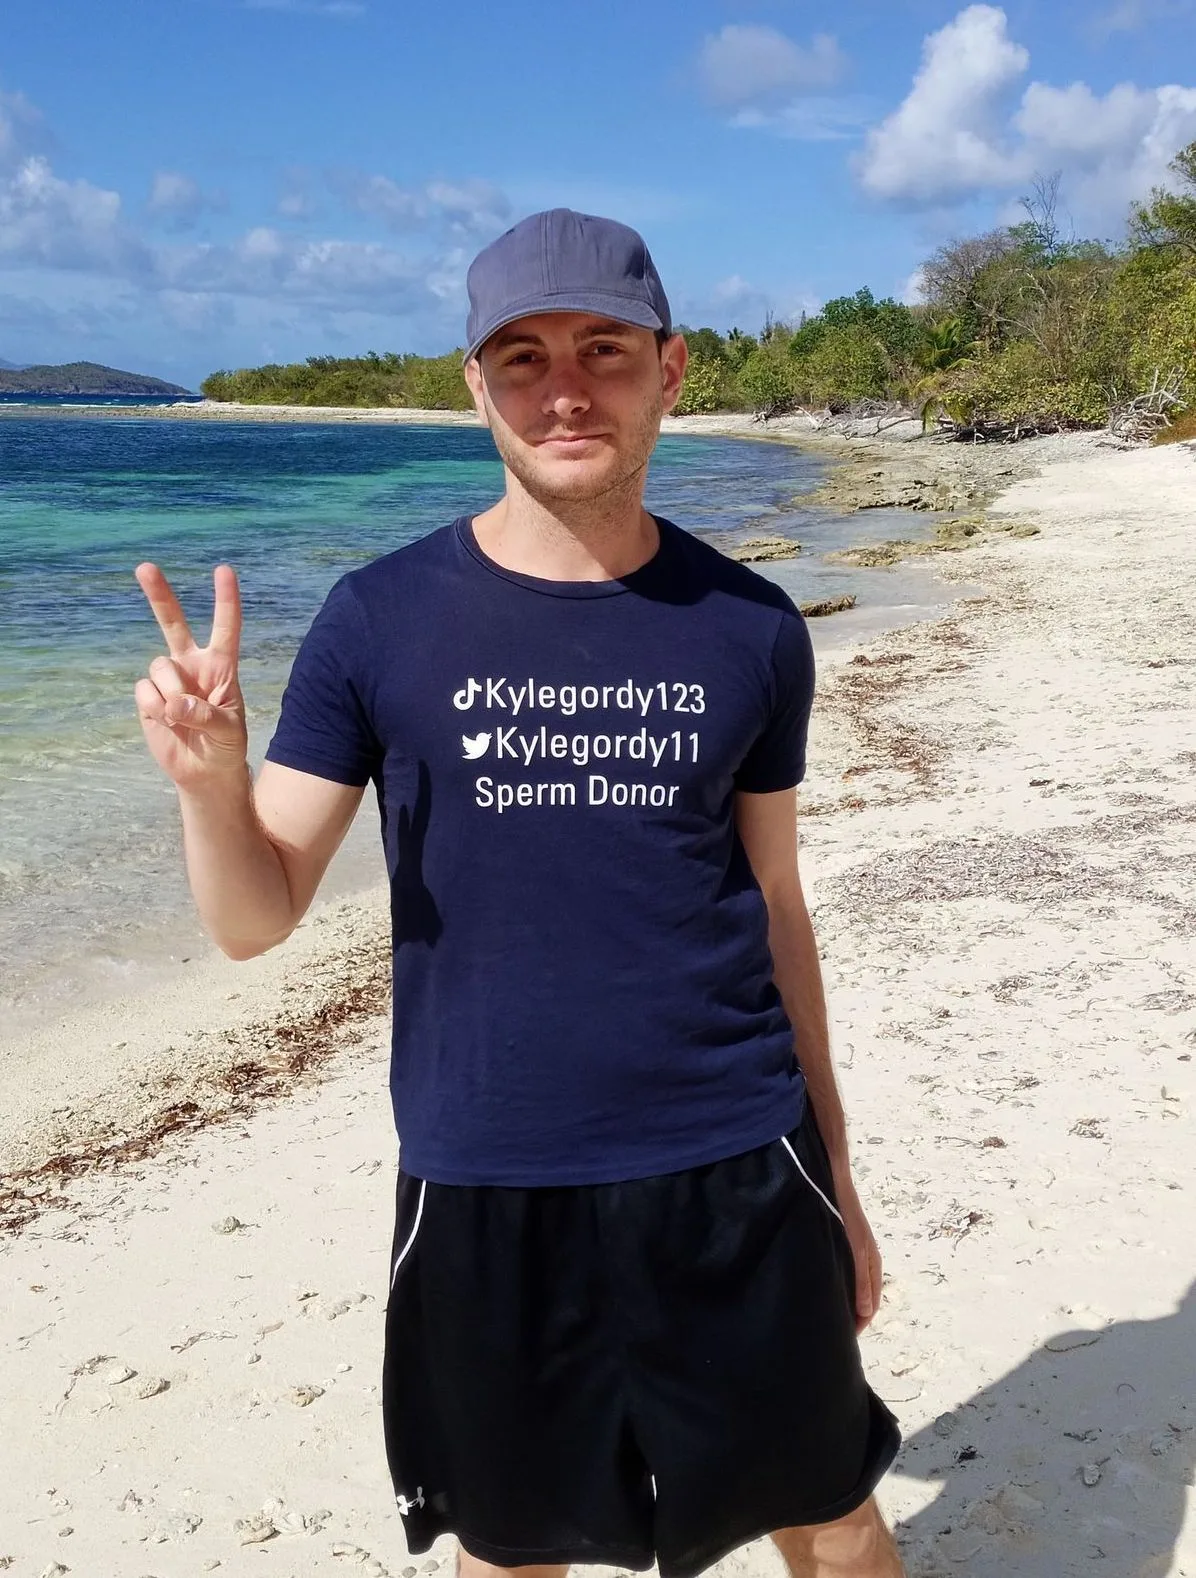 Kyle does a peace sign with his hand while on a beach.